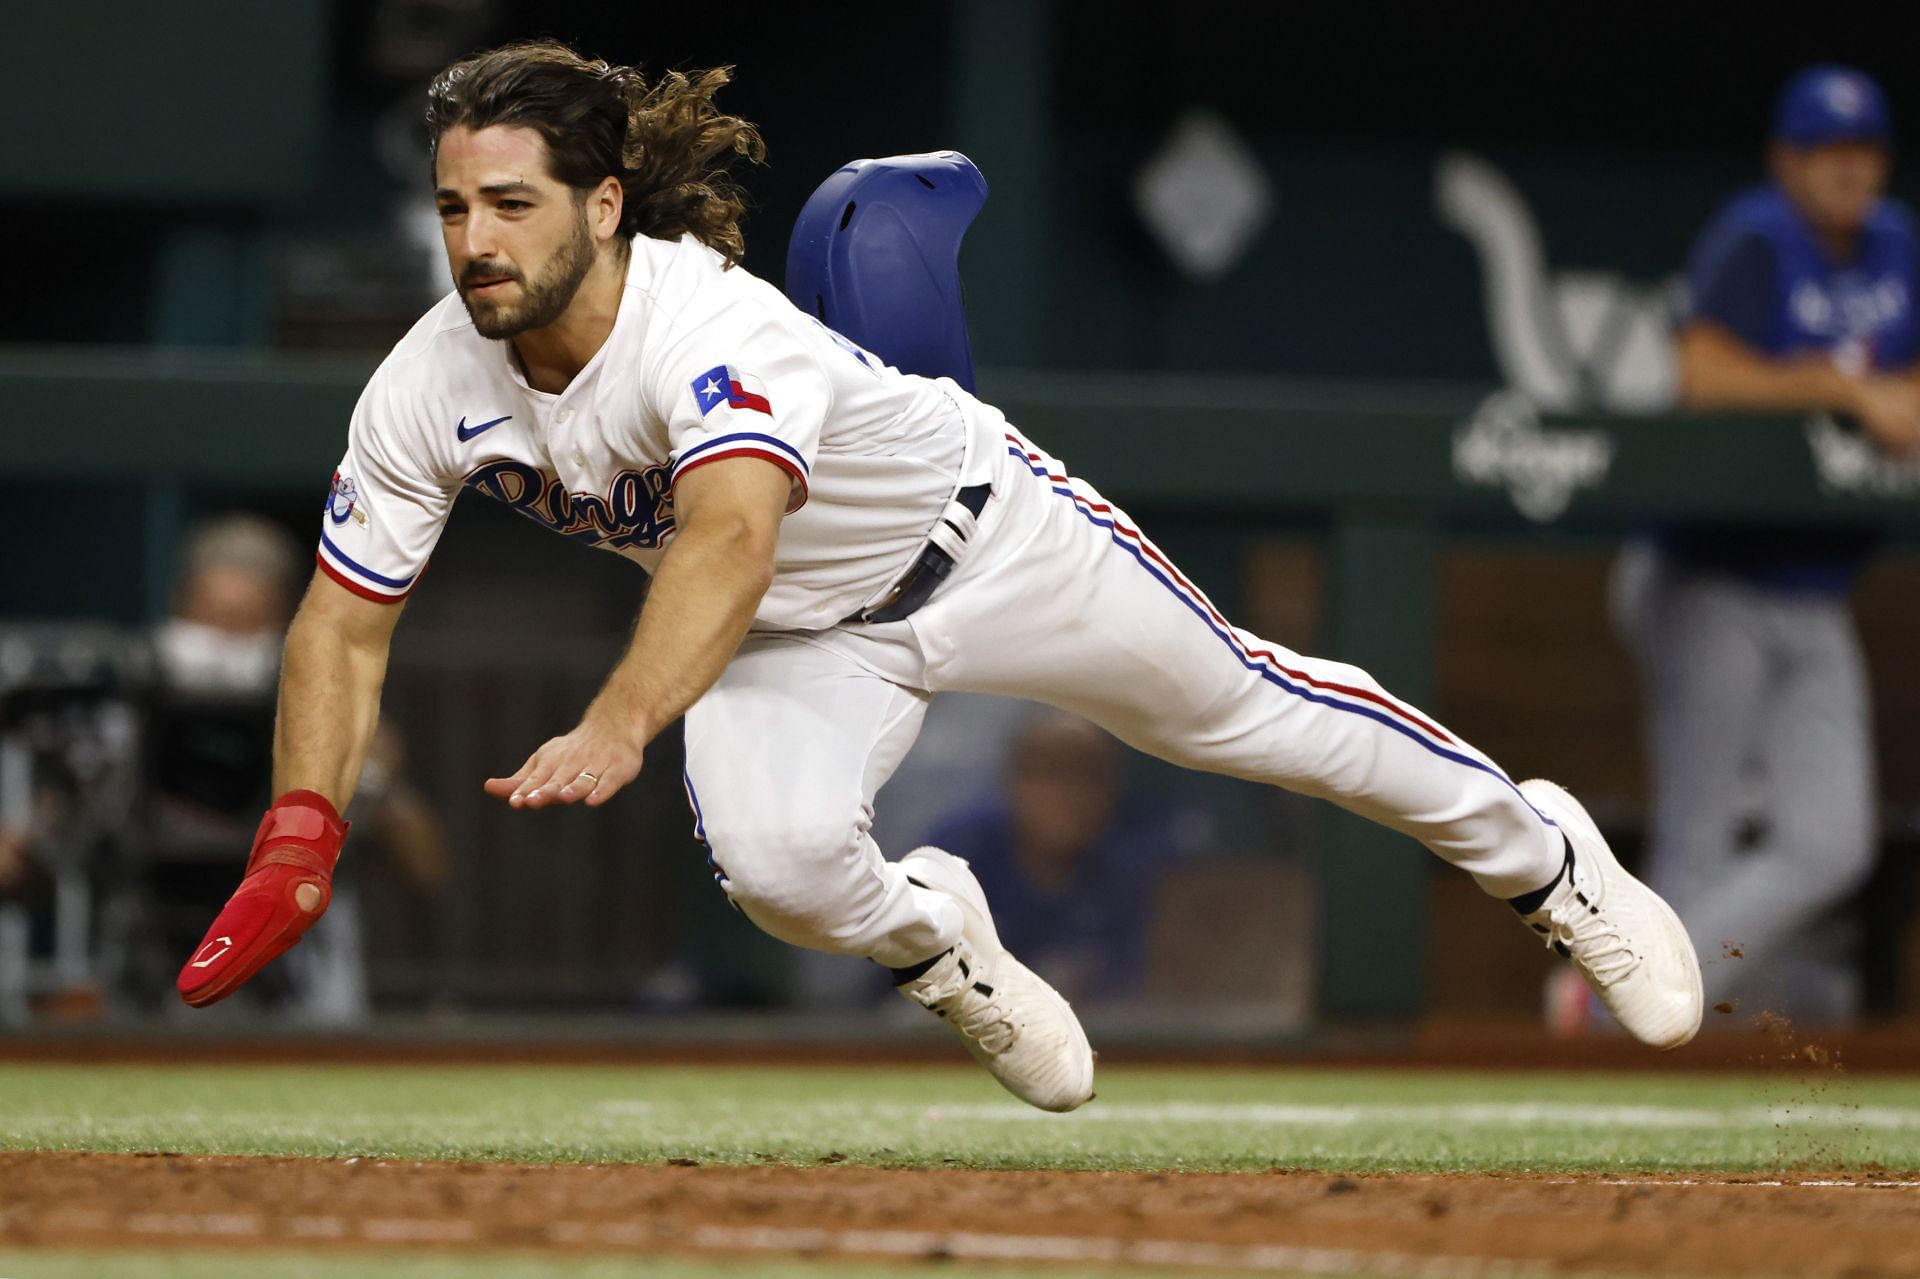 Josh Smith of the Texas Rangers dives for home plate to score a run.